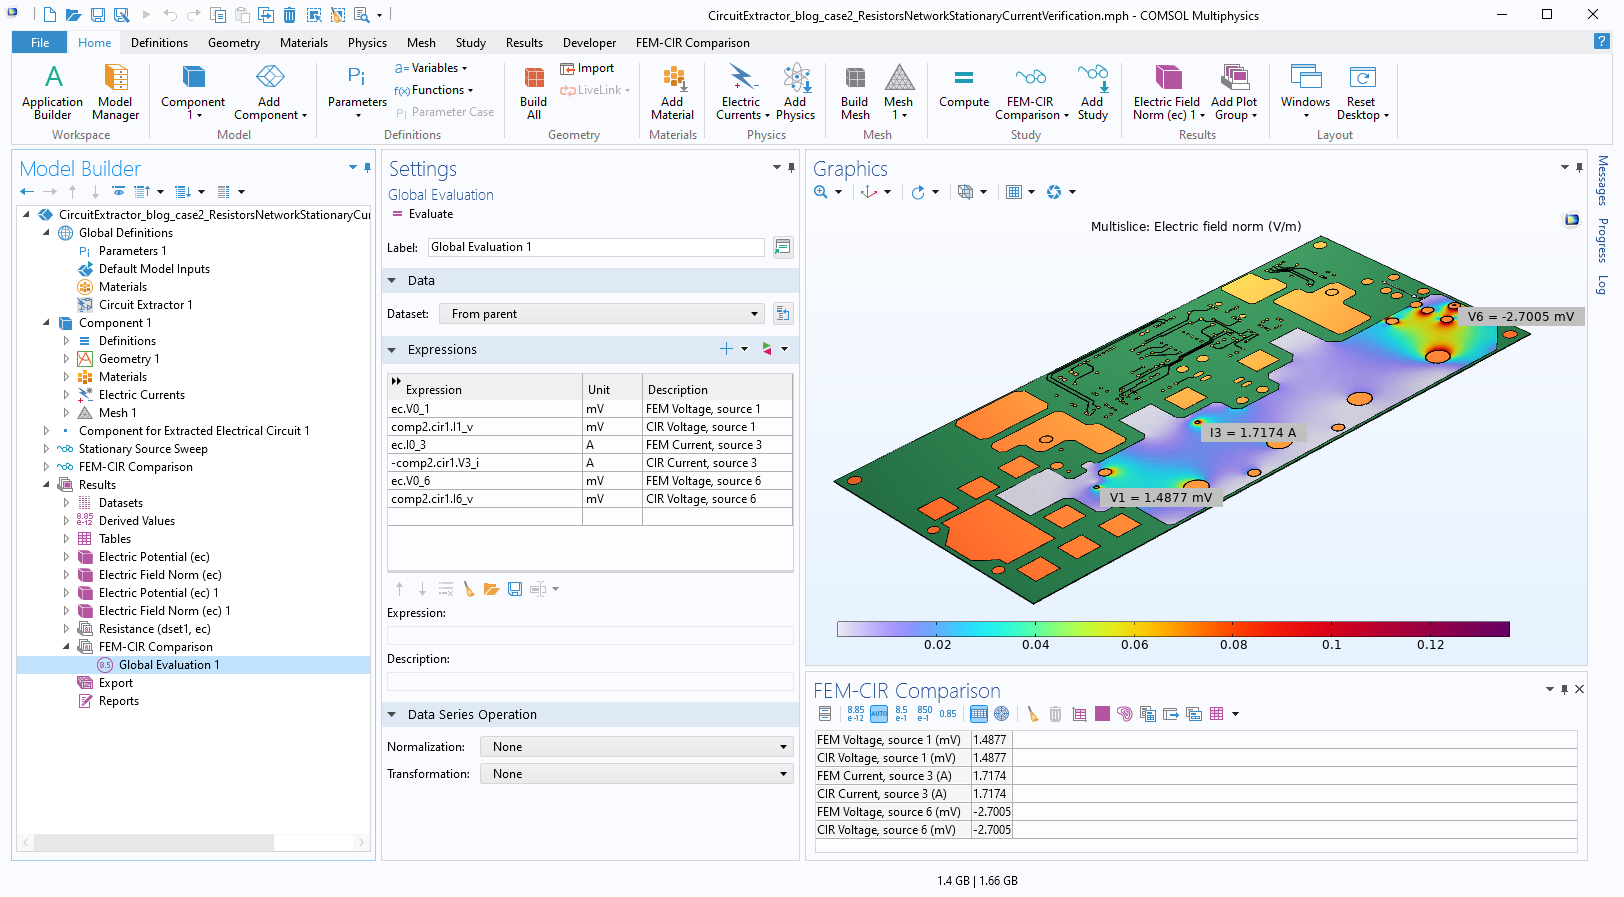 The COMSOL Multiphysics UI showing the Model Builder with the Global Evaluation 1 option selected (available under the Results section); the corresponding Settings window, with the Data, Expressions, and Data Series Operation sections expanded; and a planar circuit board model in the Graphics window.